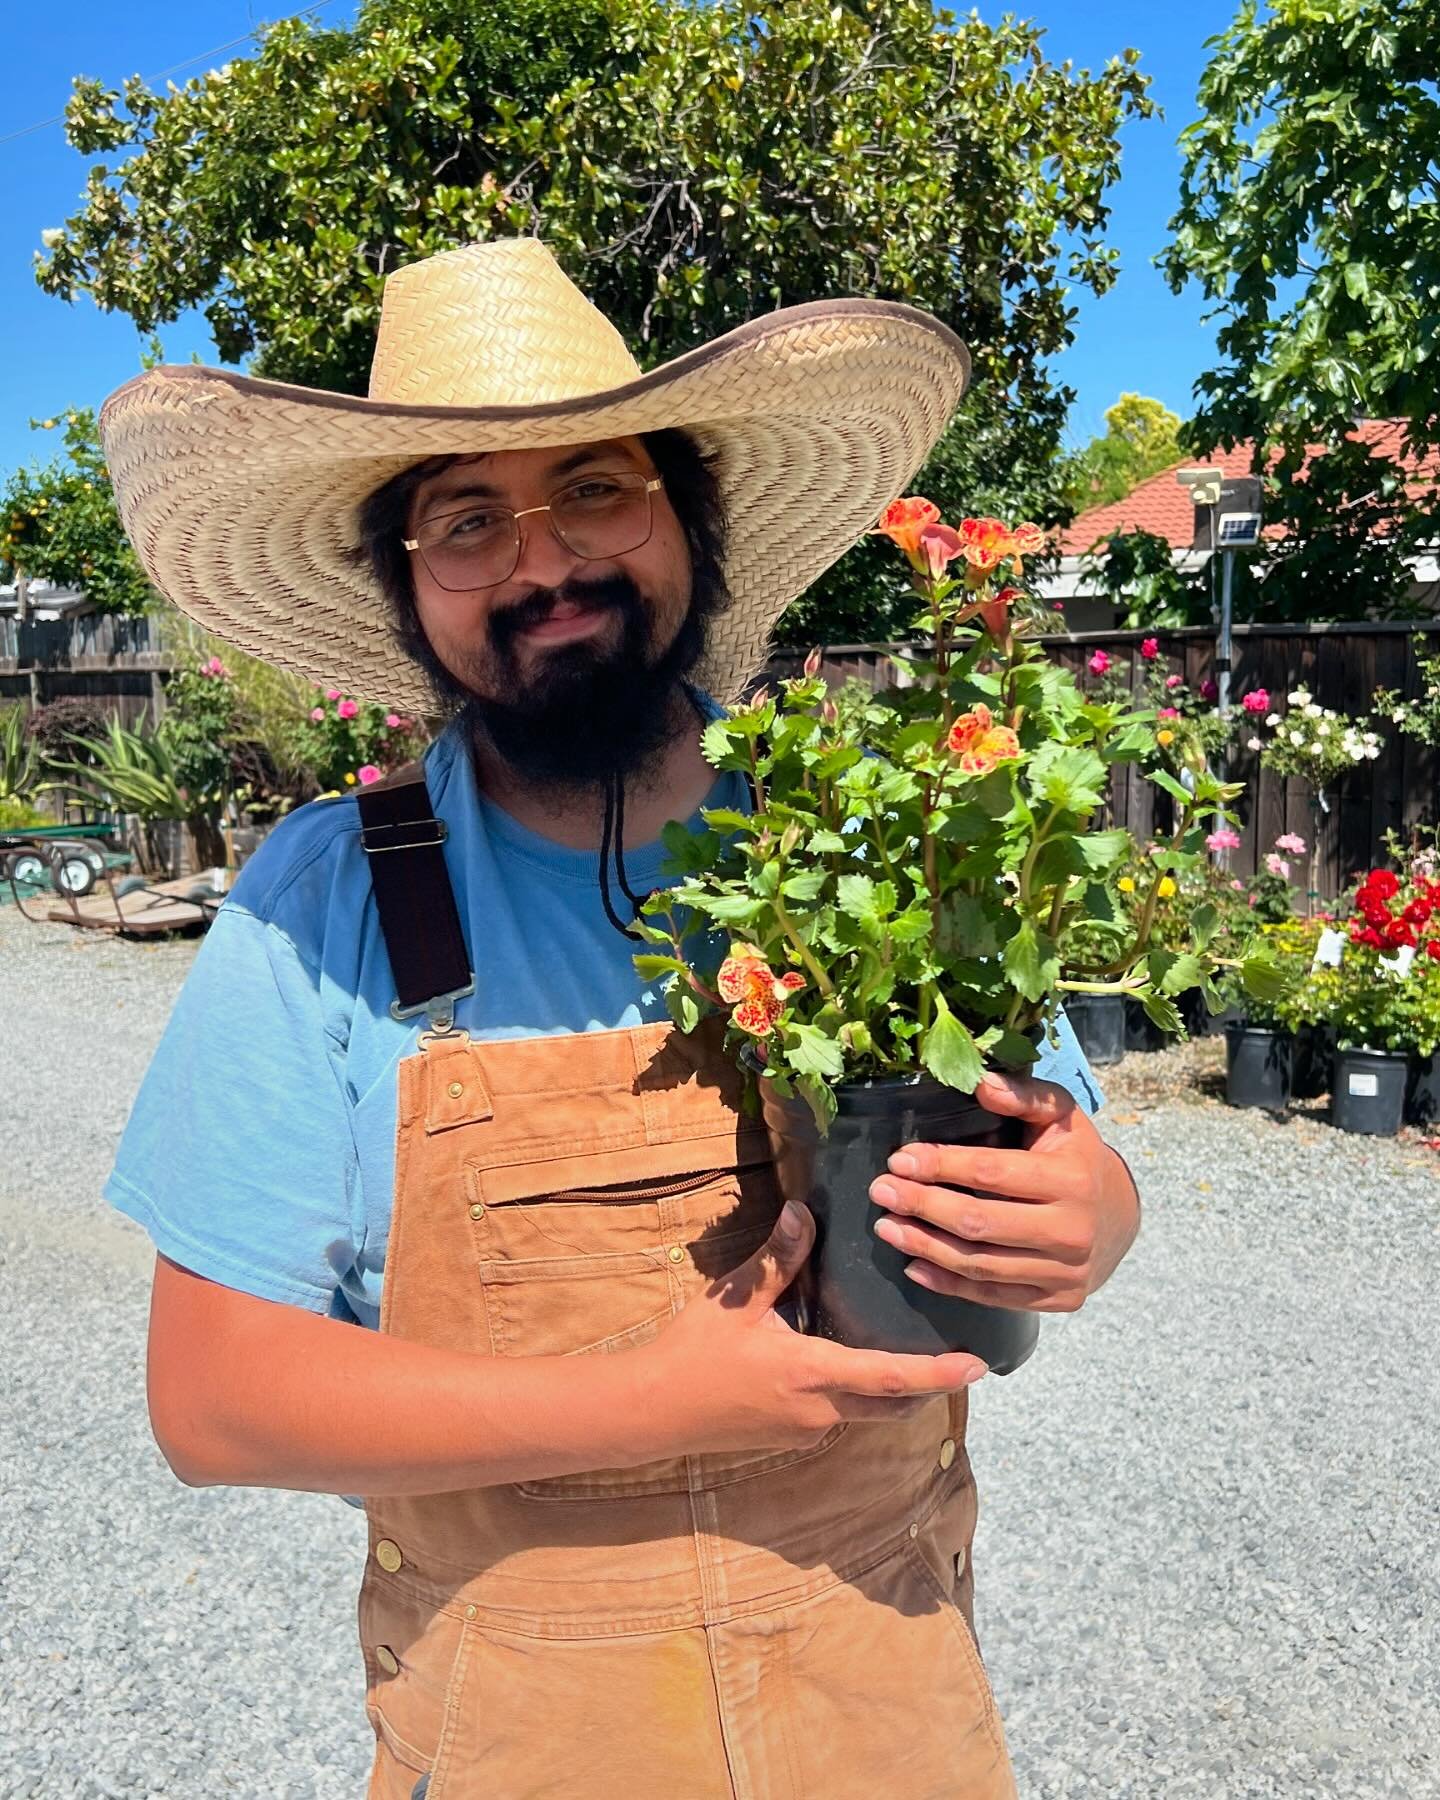 Brandon&rsquo;s excited to show you these new Mimulus hybrids, Torelus &lsquo;Tiger Melon&rsquo;! 🌼 They just arrived in the nursery this week and are really wild looking with their spotted flowers and serrated-edged leaves. If you like your Mimulus